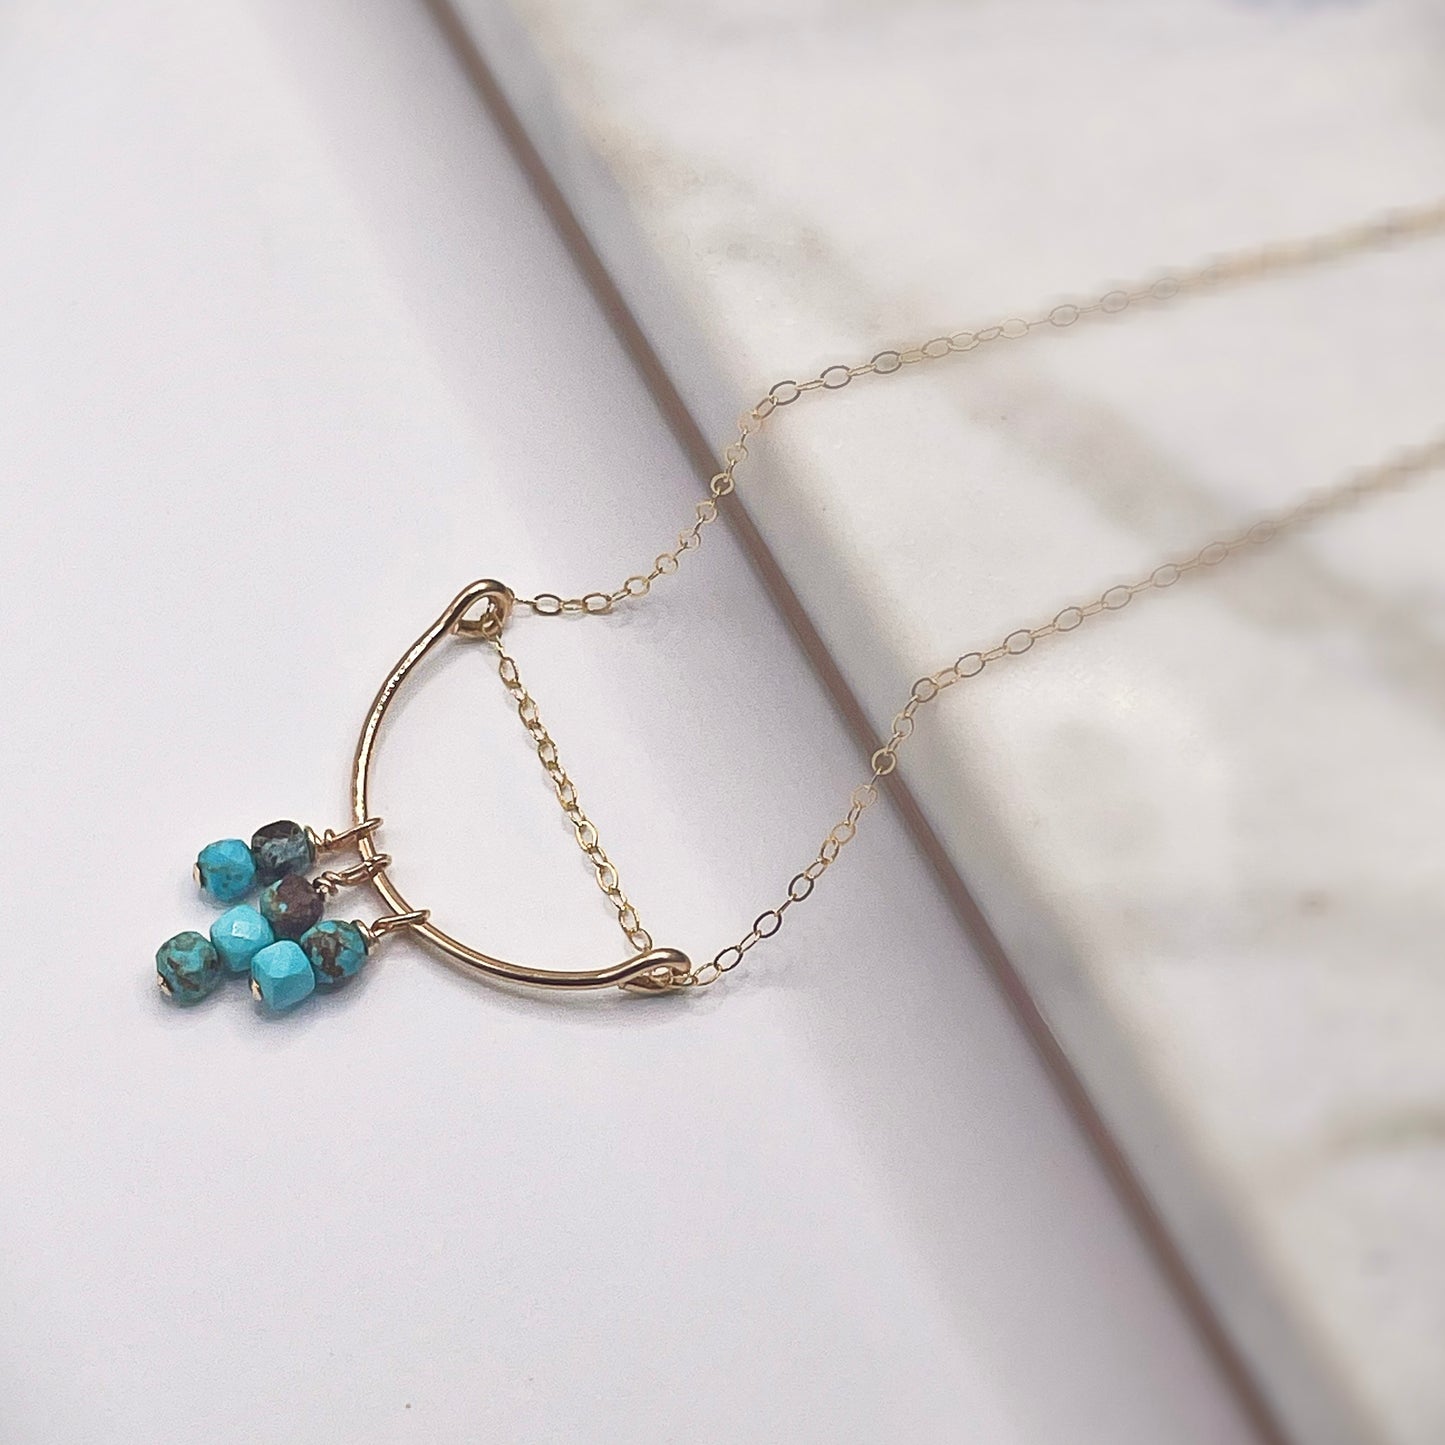 Turquoise Dangle Necklace